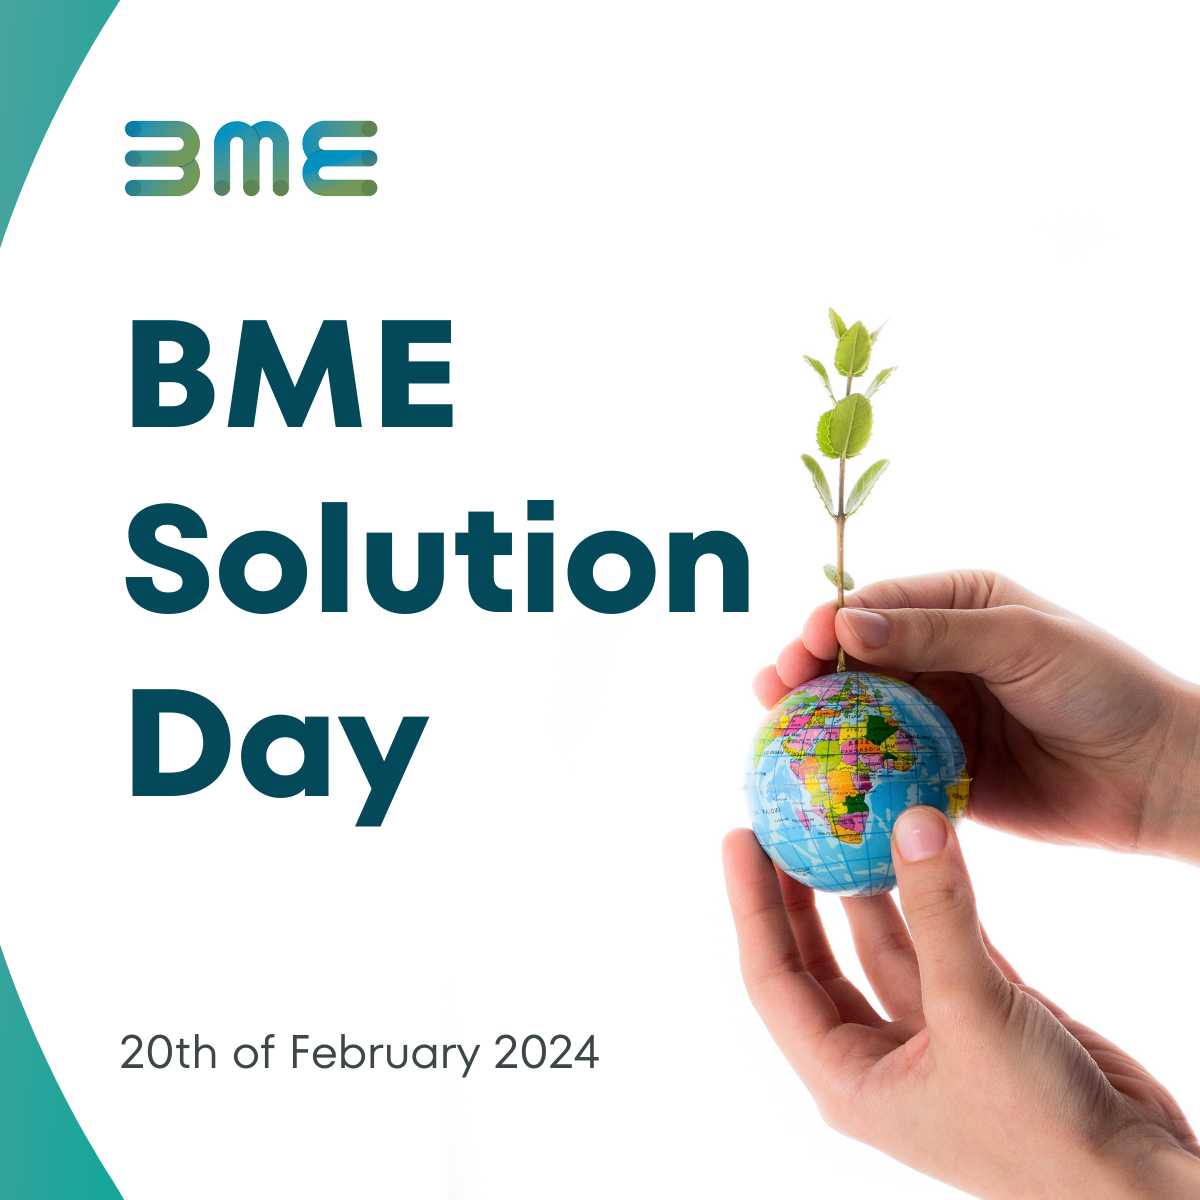 BME Solution Day